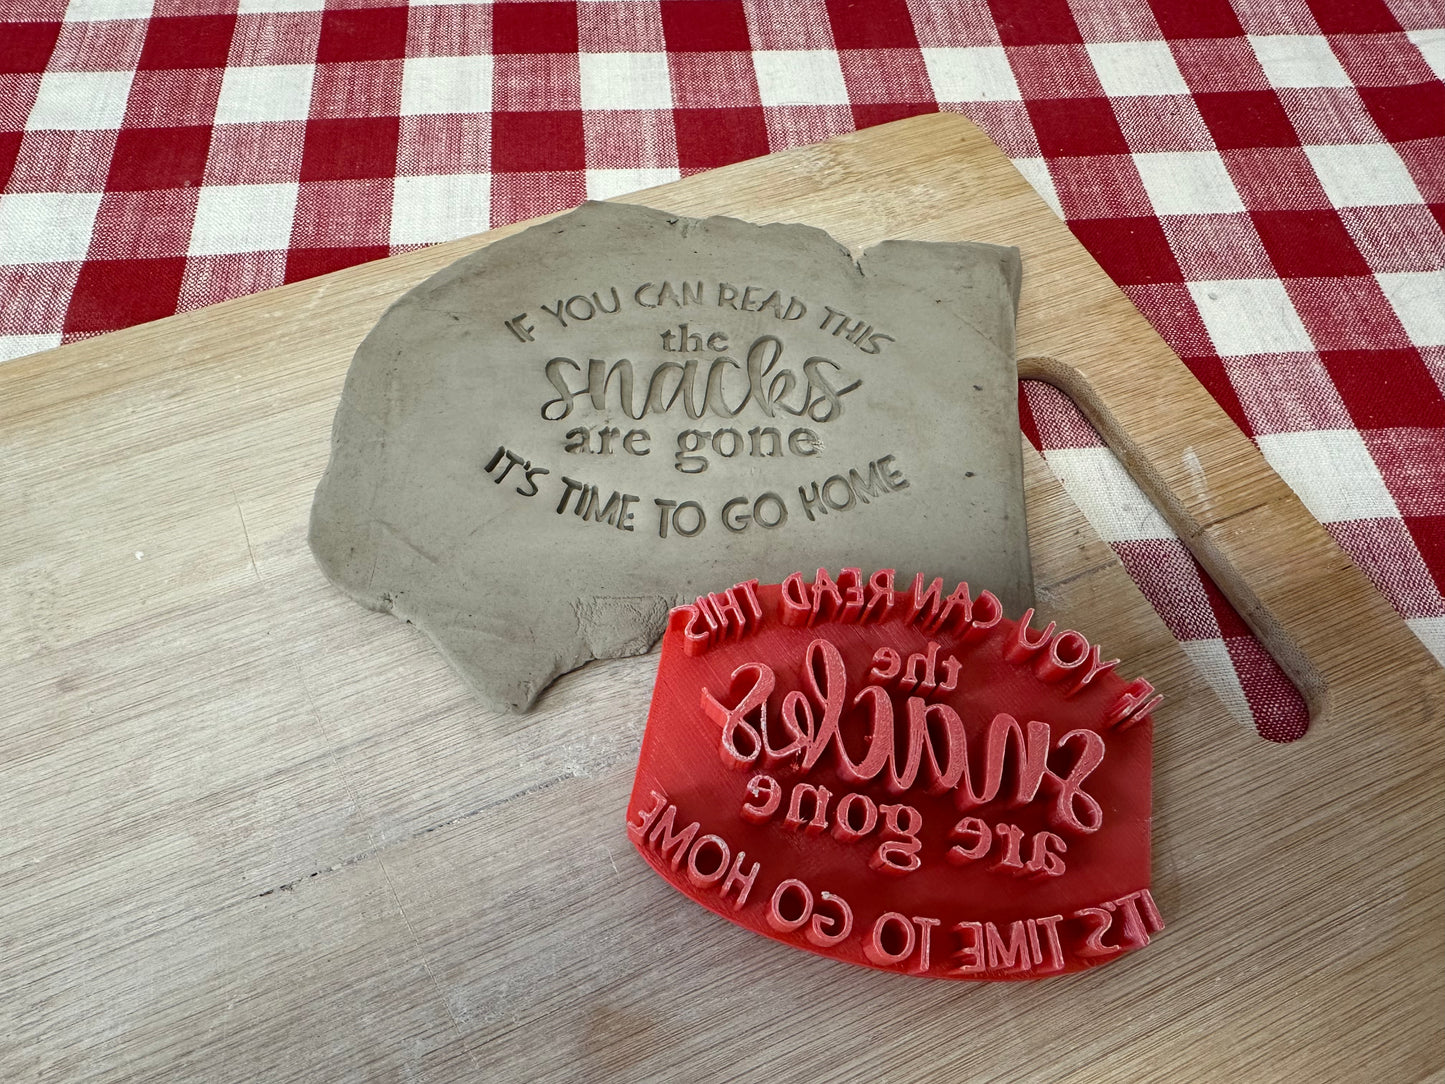 "If You're Reading This the Snacks are Gone It's Time to go Home" word pottery stamp - plastic 3D printed, multiple sizes